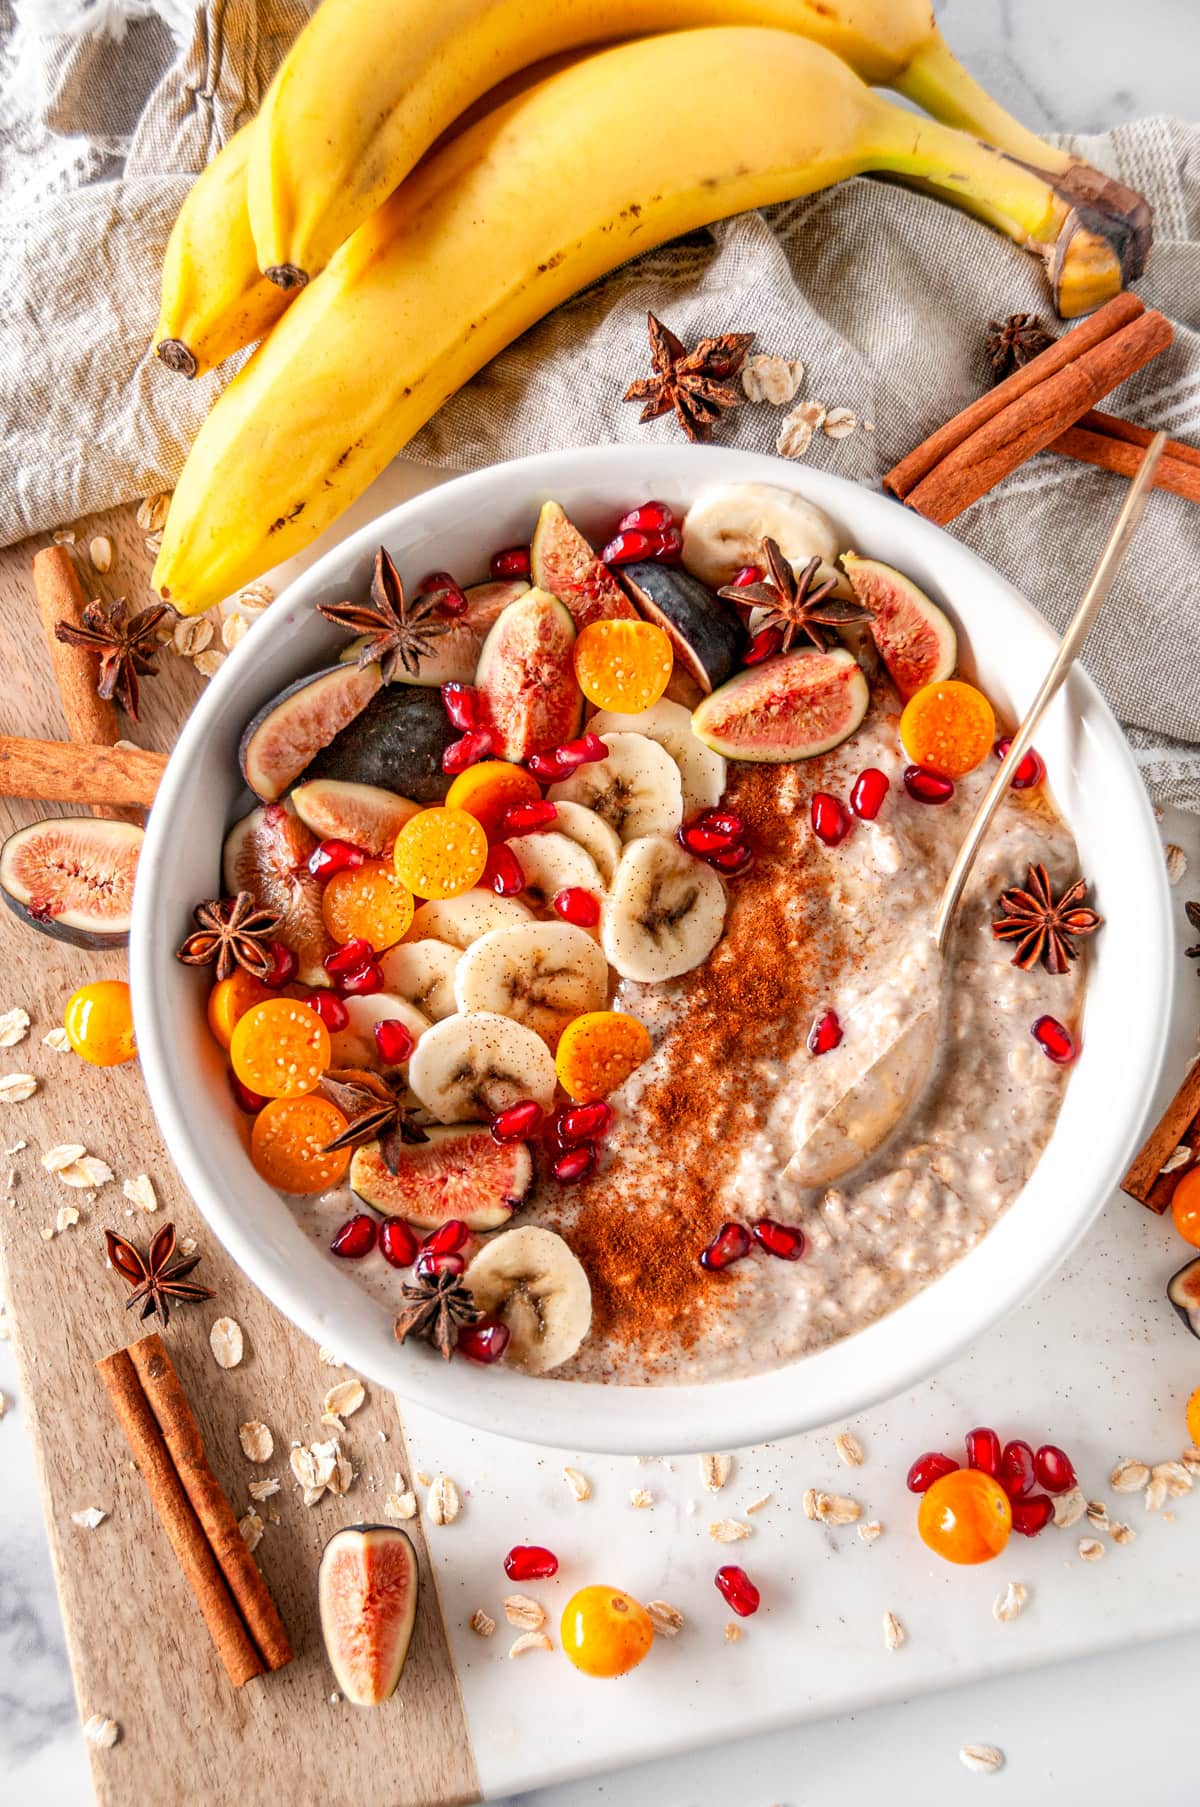 Banana Bread Overnight Oats in white bowl with gold spoon, sliced figs, golden berries, pomegranate seeds and star anise on white marble